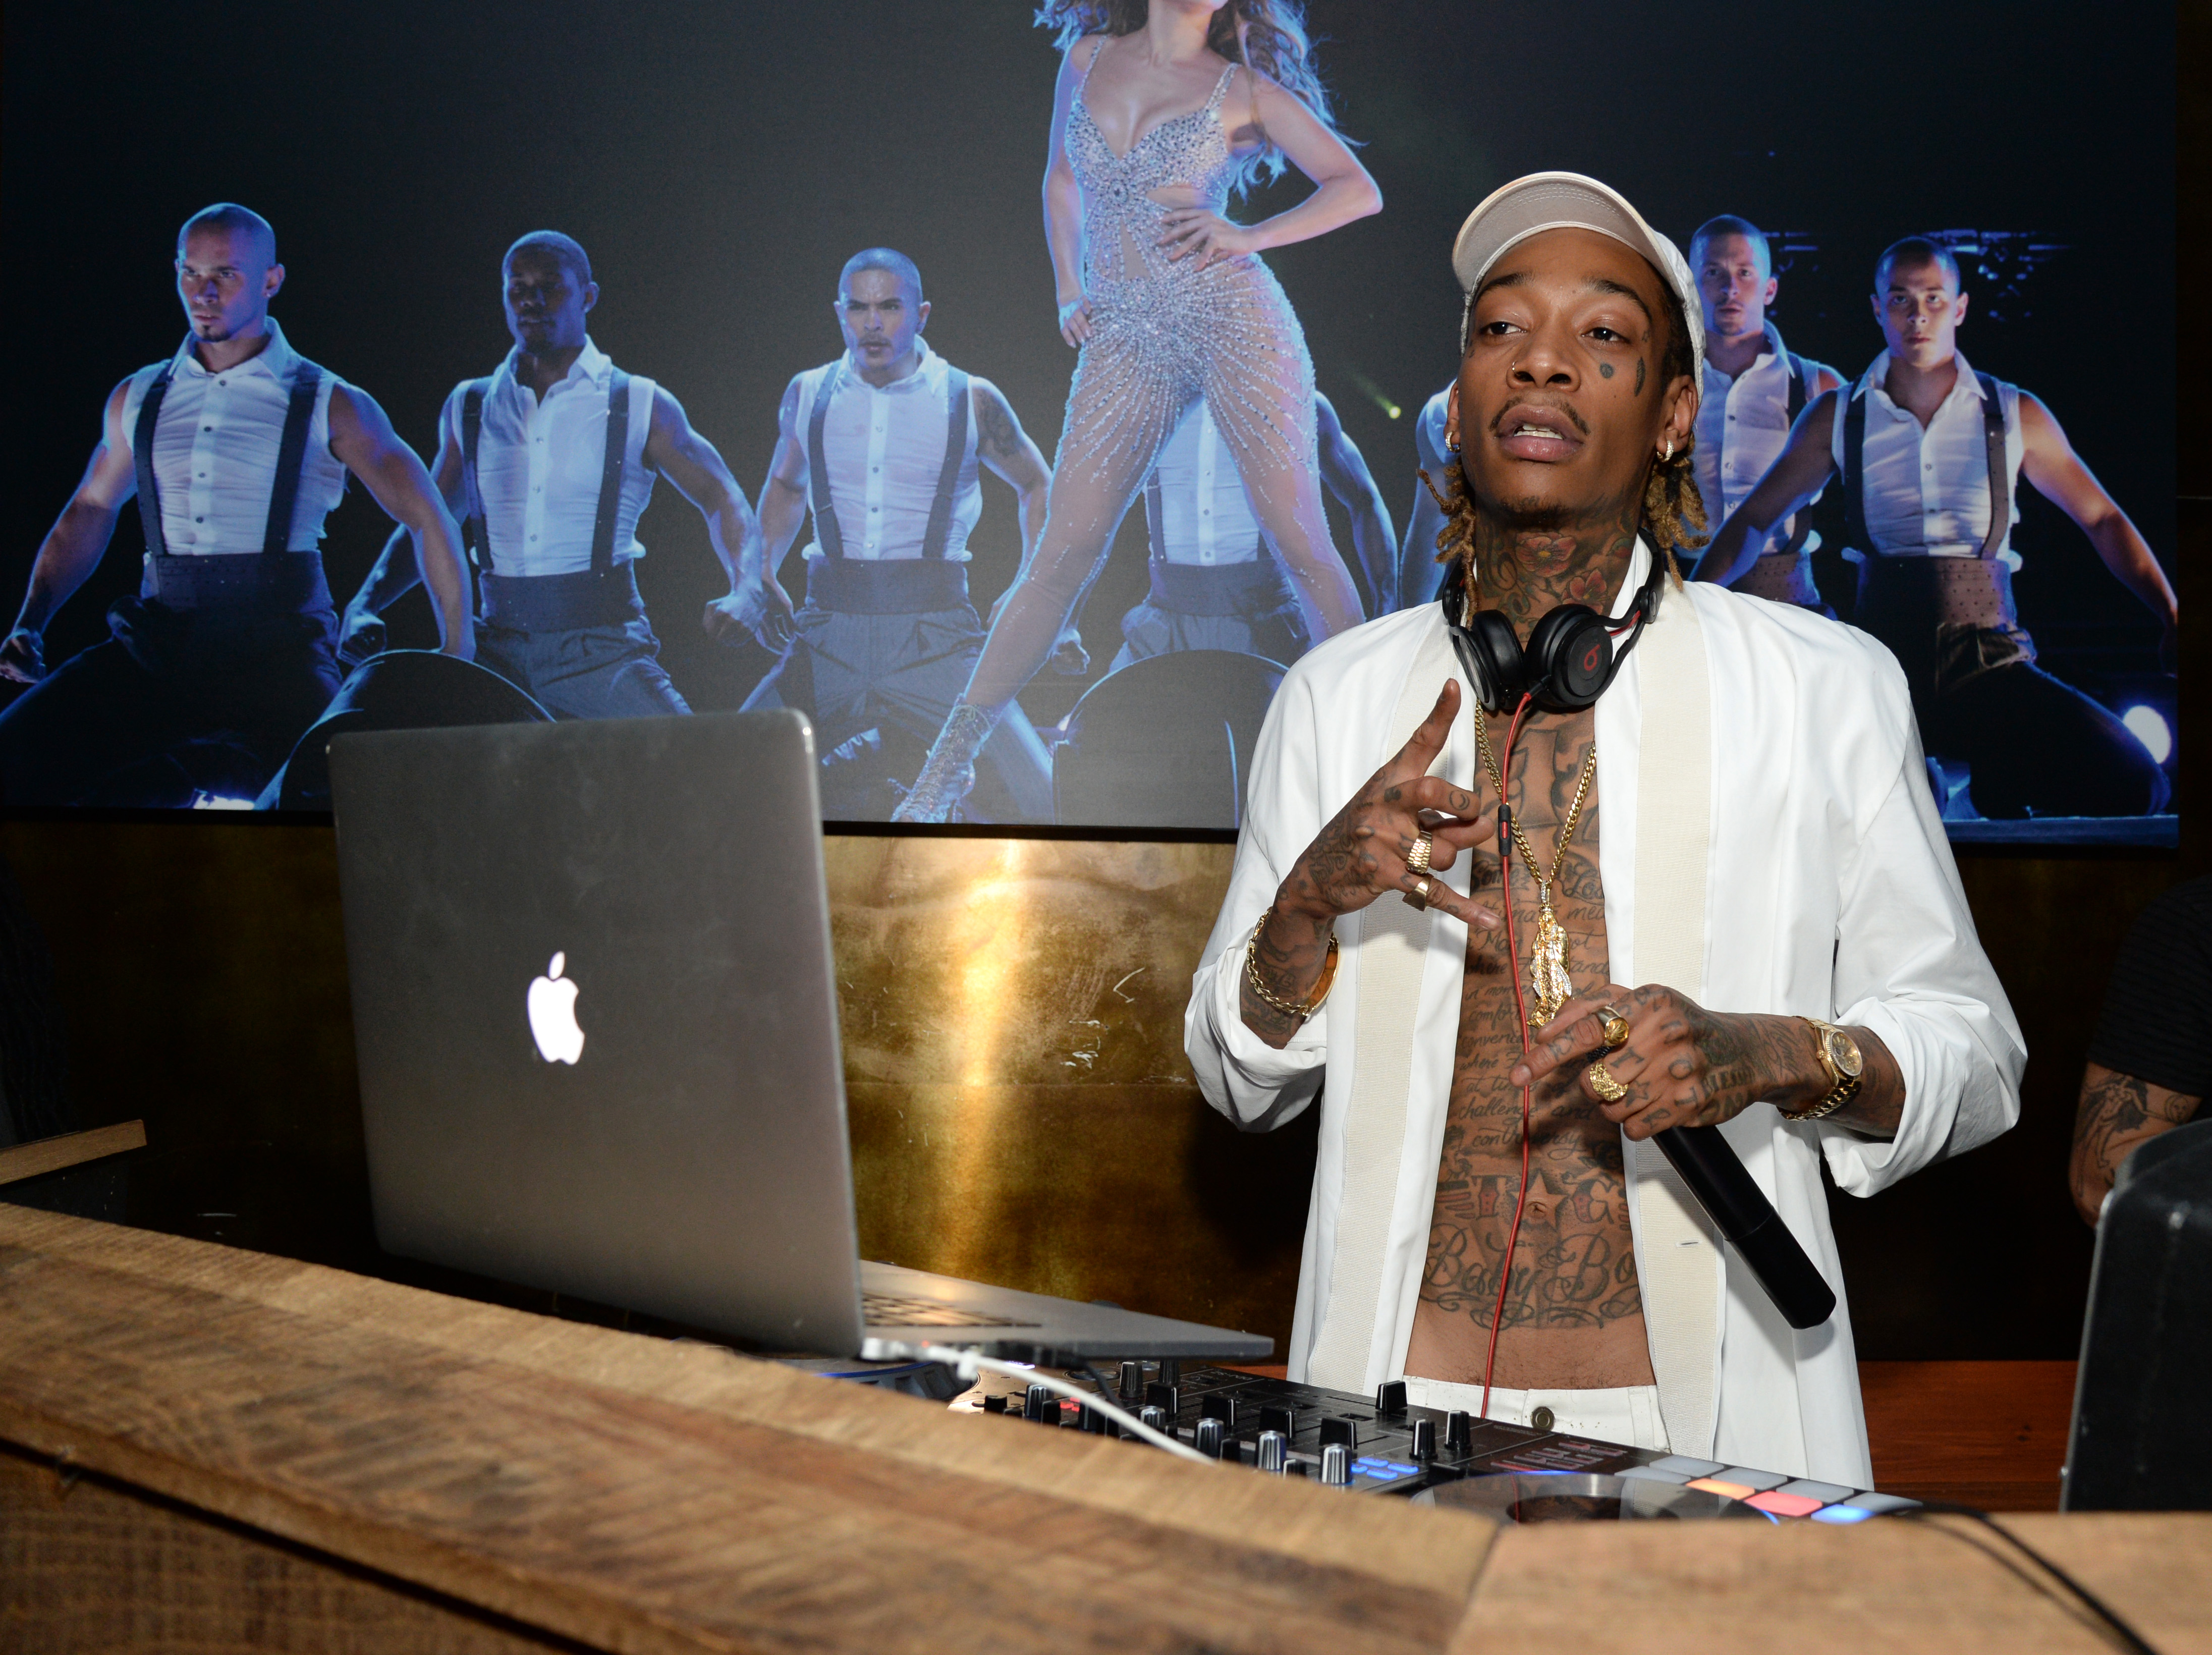 WEST HOLLYWOOD, CA - NOVEMBER 22: Rapper Wiz Khalifa spins at the Moet & Chandon AMA After Party with Jennifer Lopez at HYDE Sunset: Kitchen + Cocktails on November 22, 2015 in West Hollywood, California. (Photo by Michael Kovac/Getty Images for Moet & Chandon)